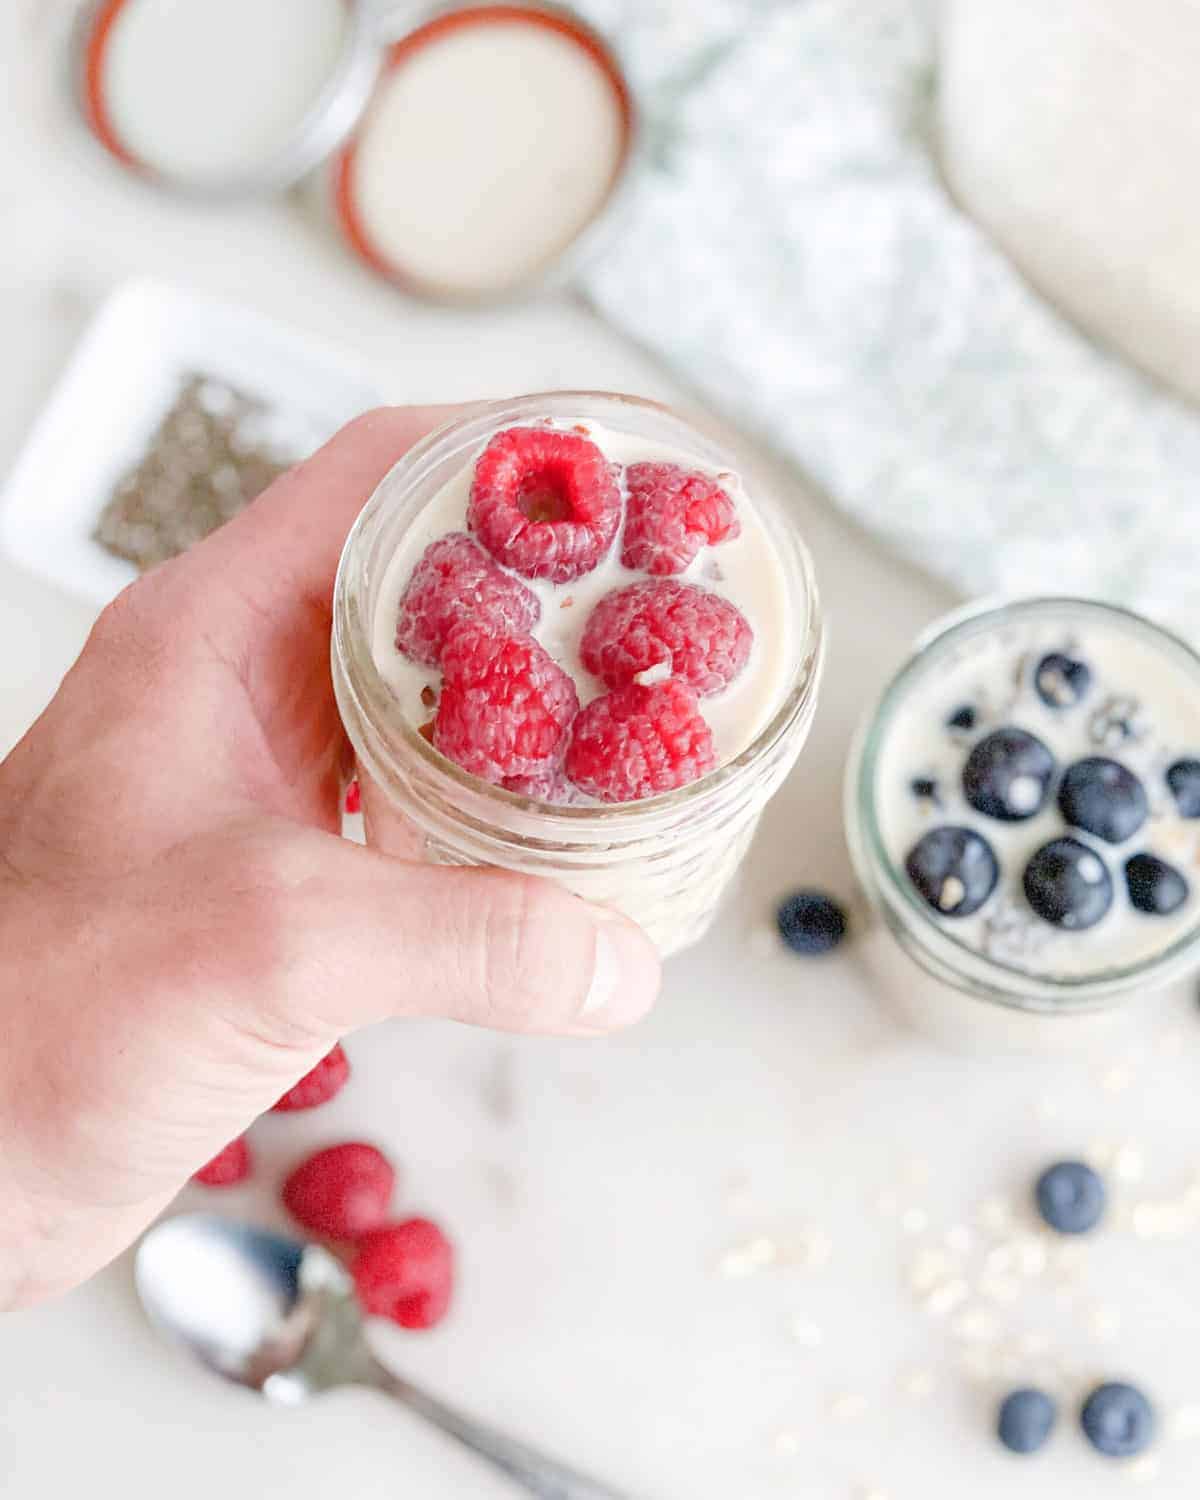 close up of overnight oats with raspberries and blueberries on top against a light surface